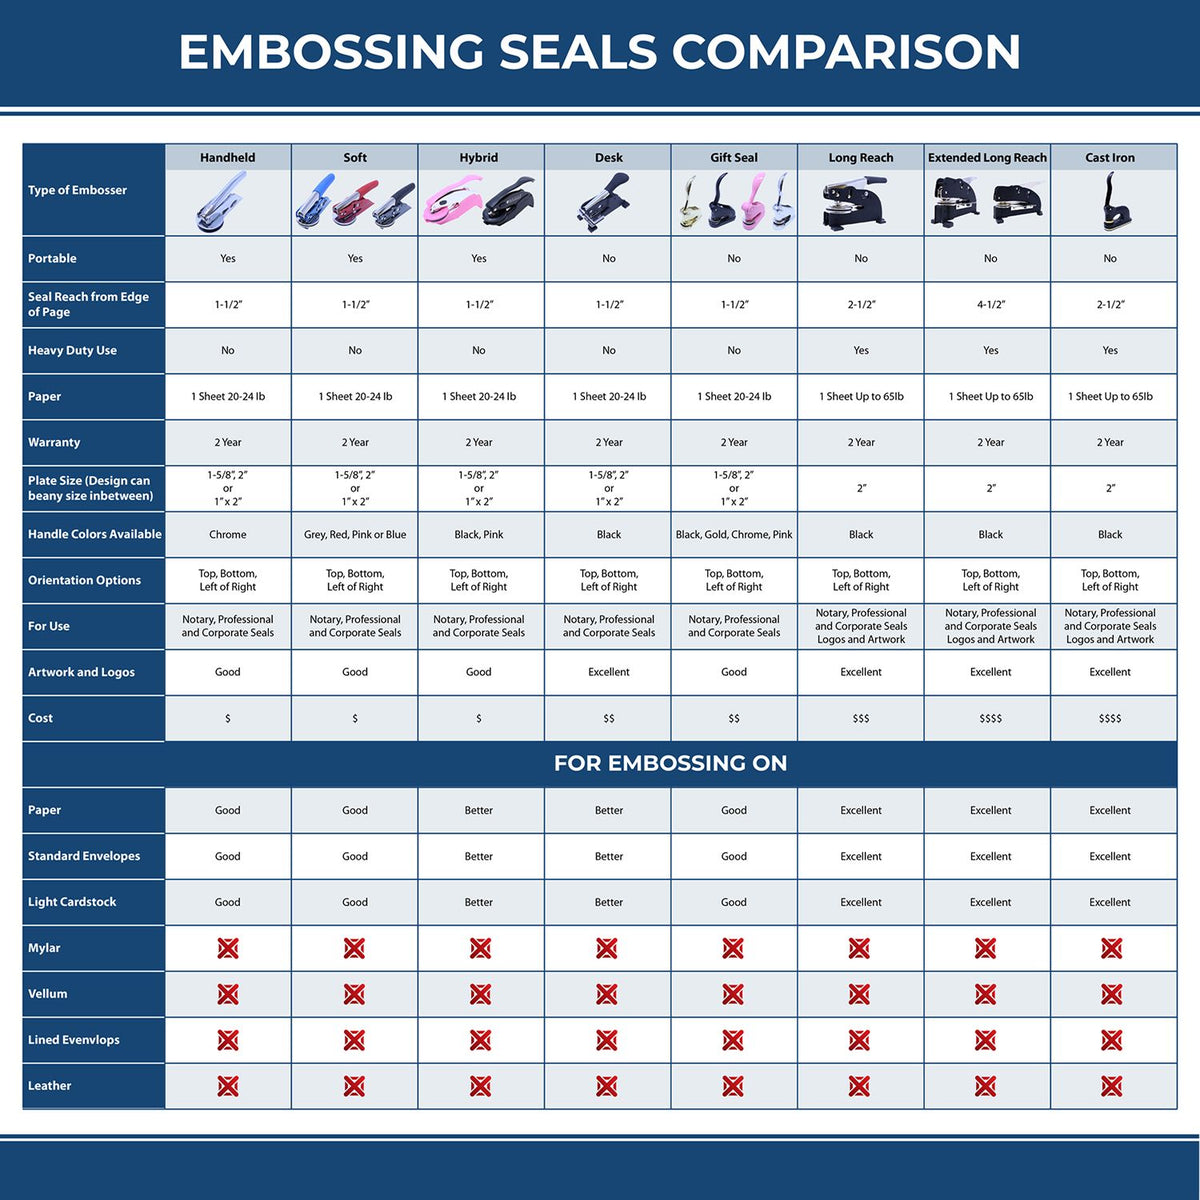 A comparison chart for the different types of mount models available for the Hybrid Texas Engineer Seal